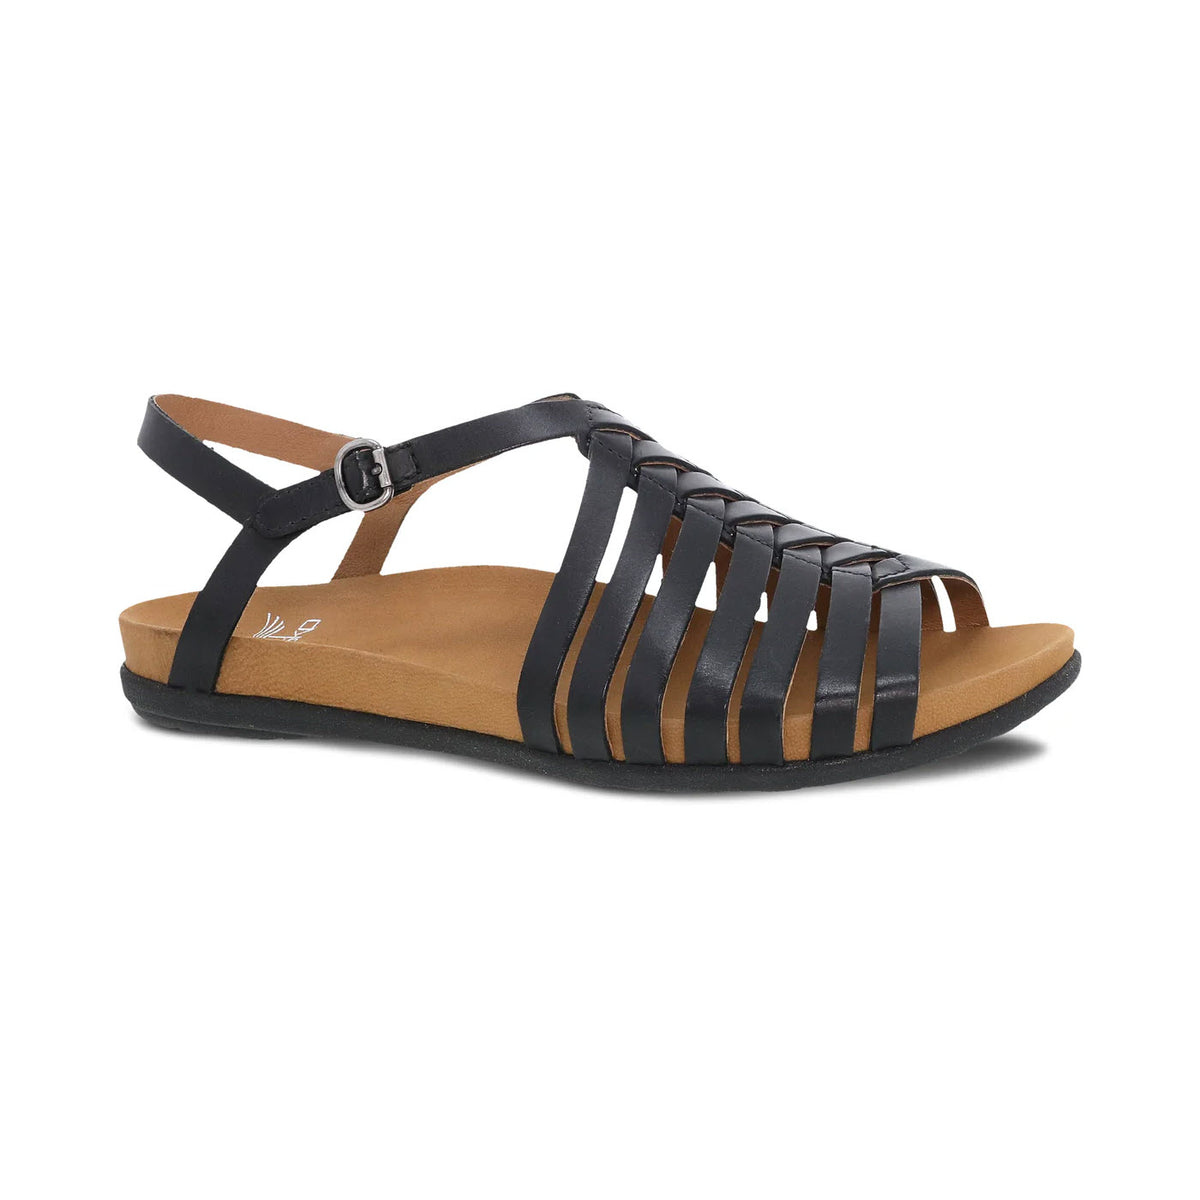 Dansko Jennifer Black strappy sandal with a fashionable strap design, featuring a buckle closure and a brown footbed, isolated on a white background.